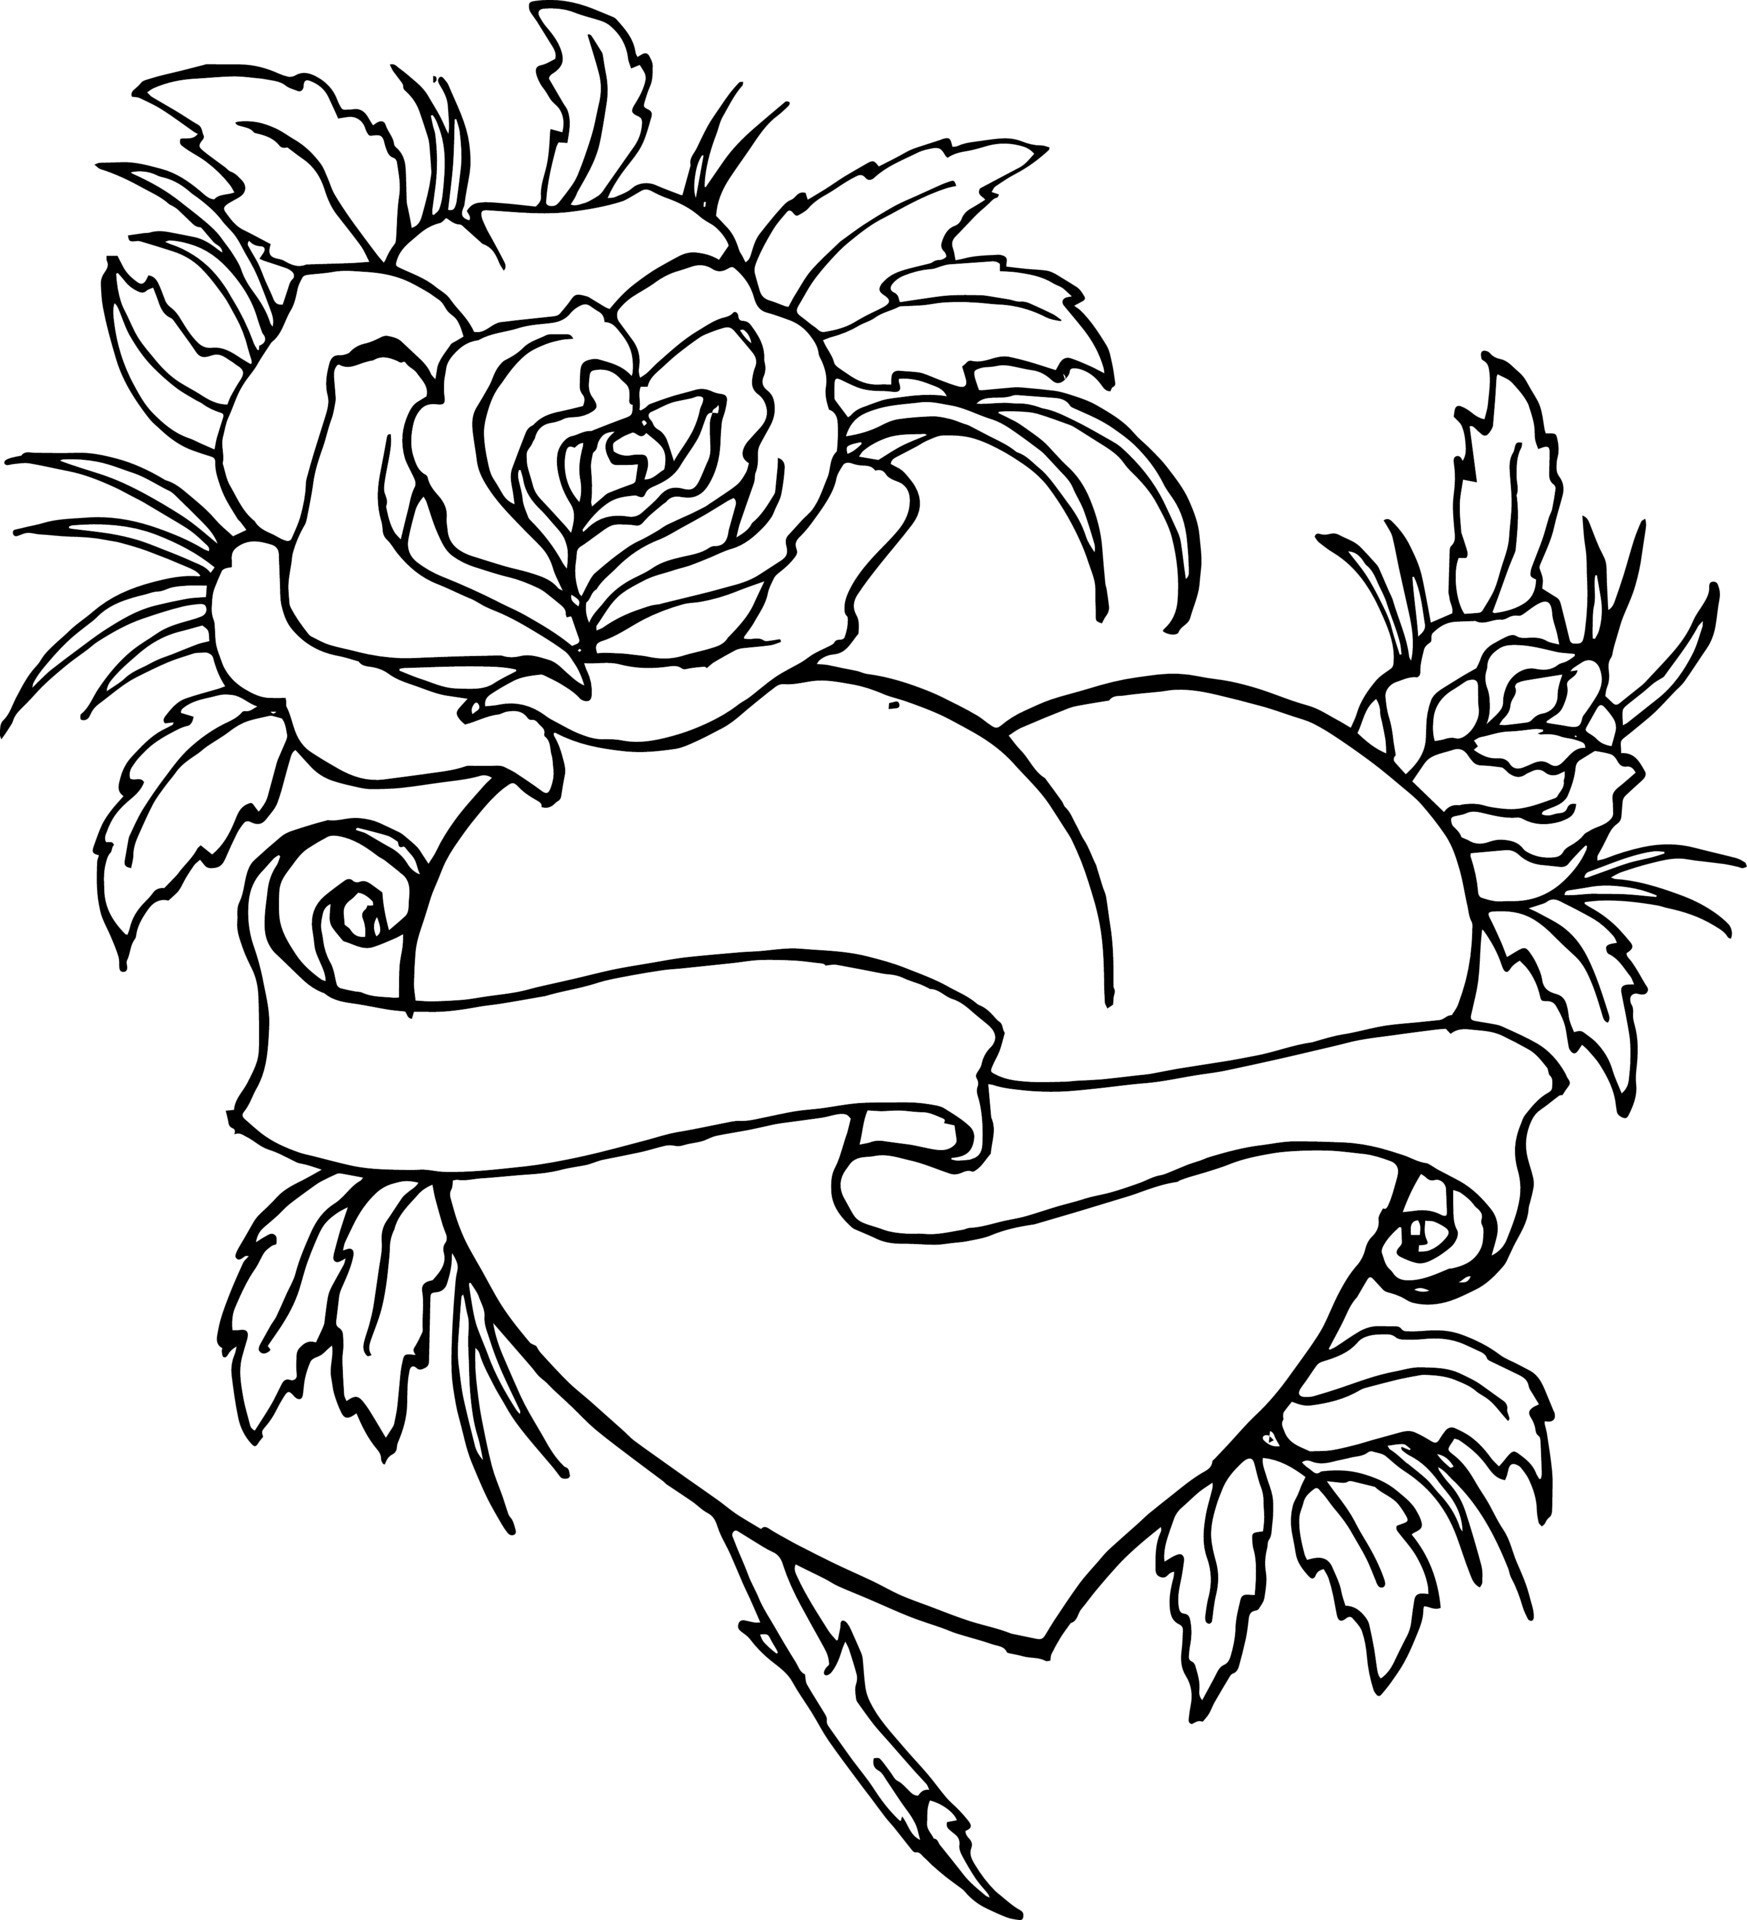 Black And White Illustration, Hand Drawn Heart In Roses With Ribbon ...